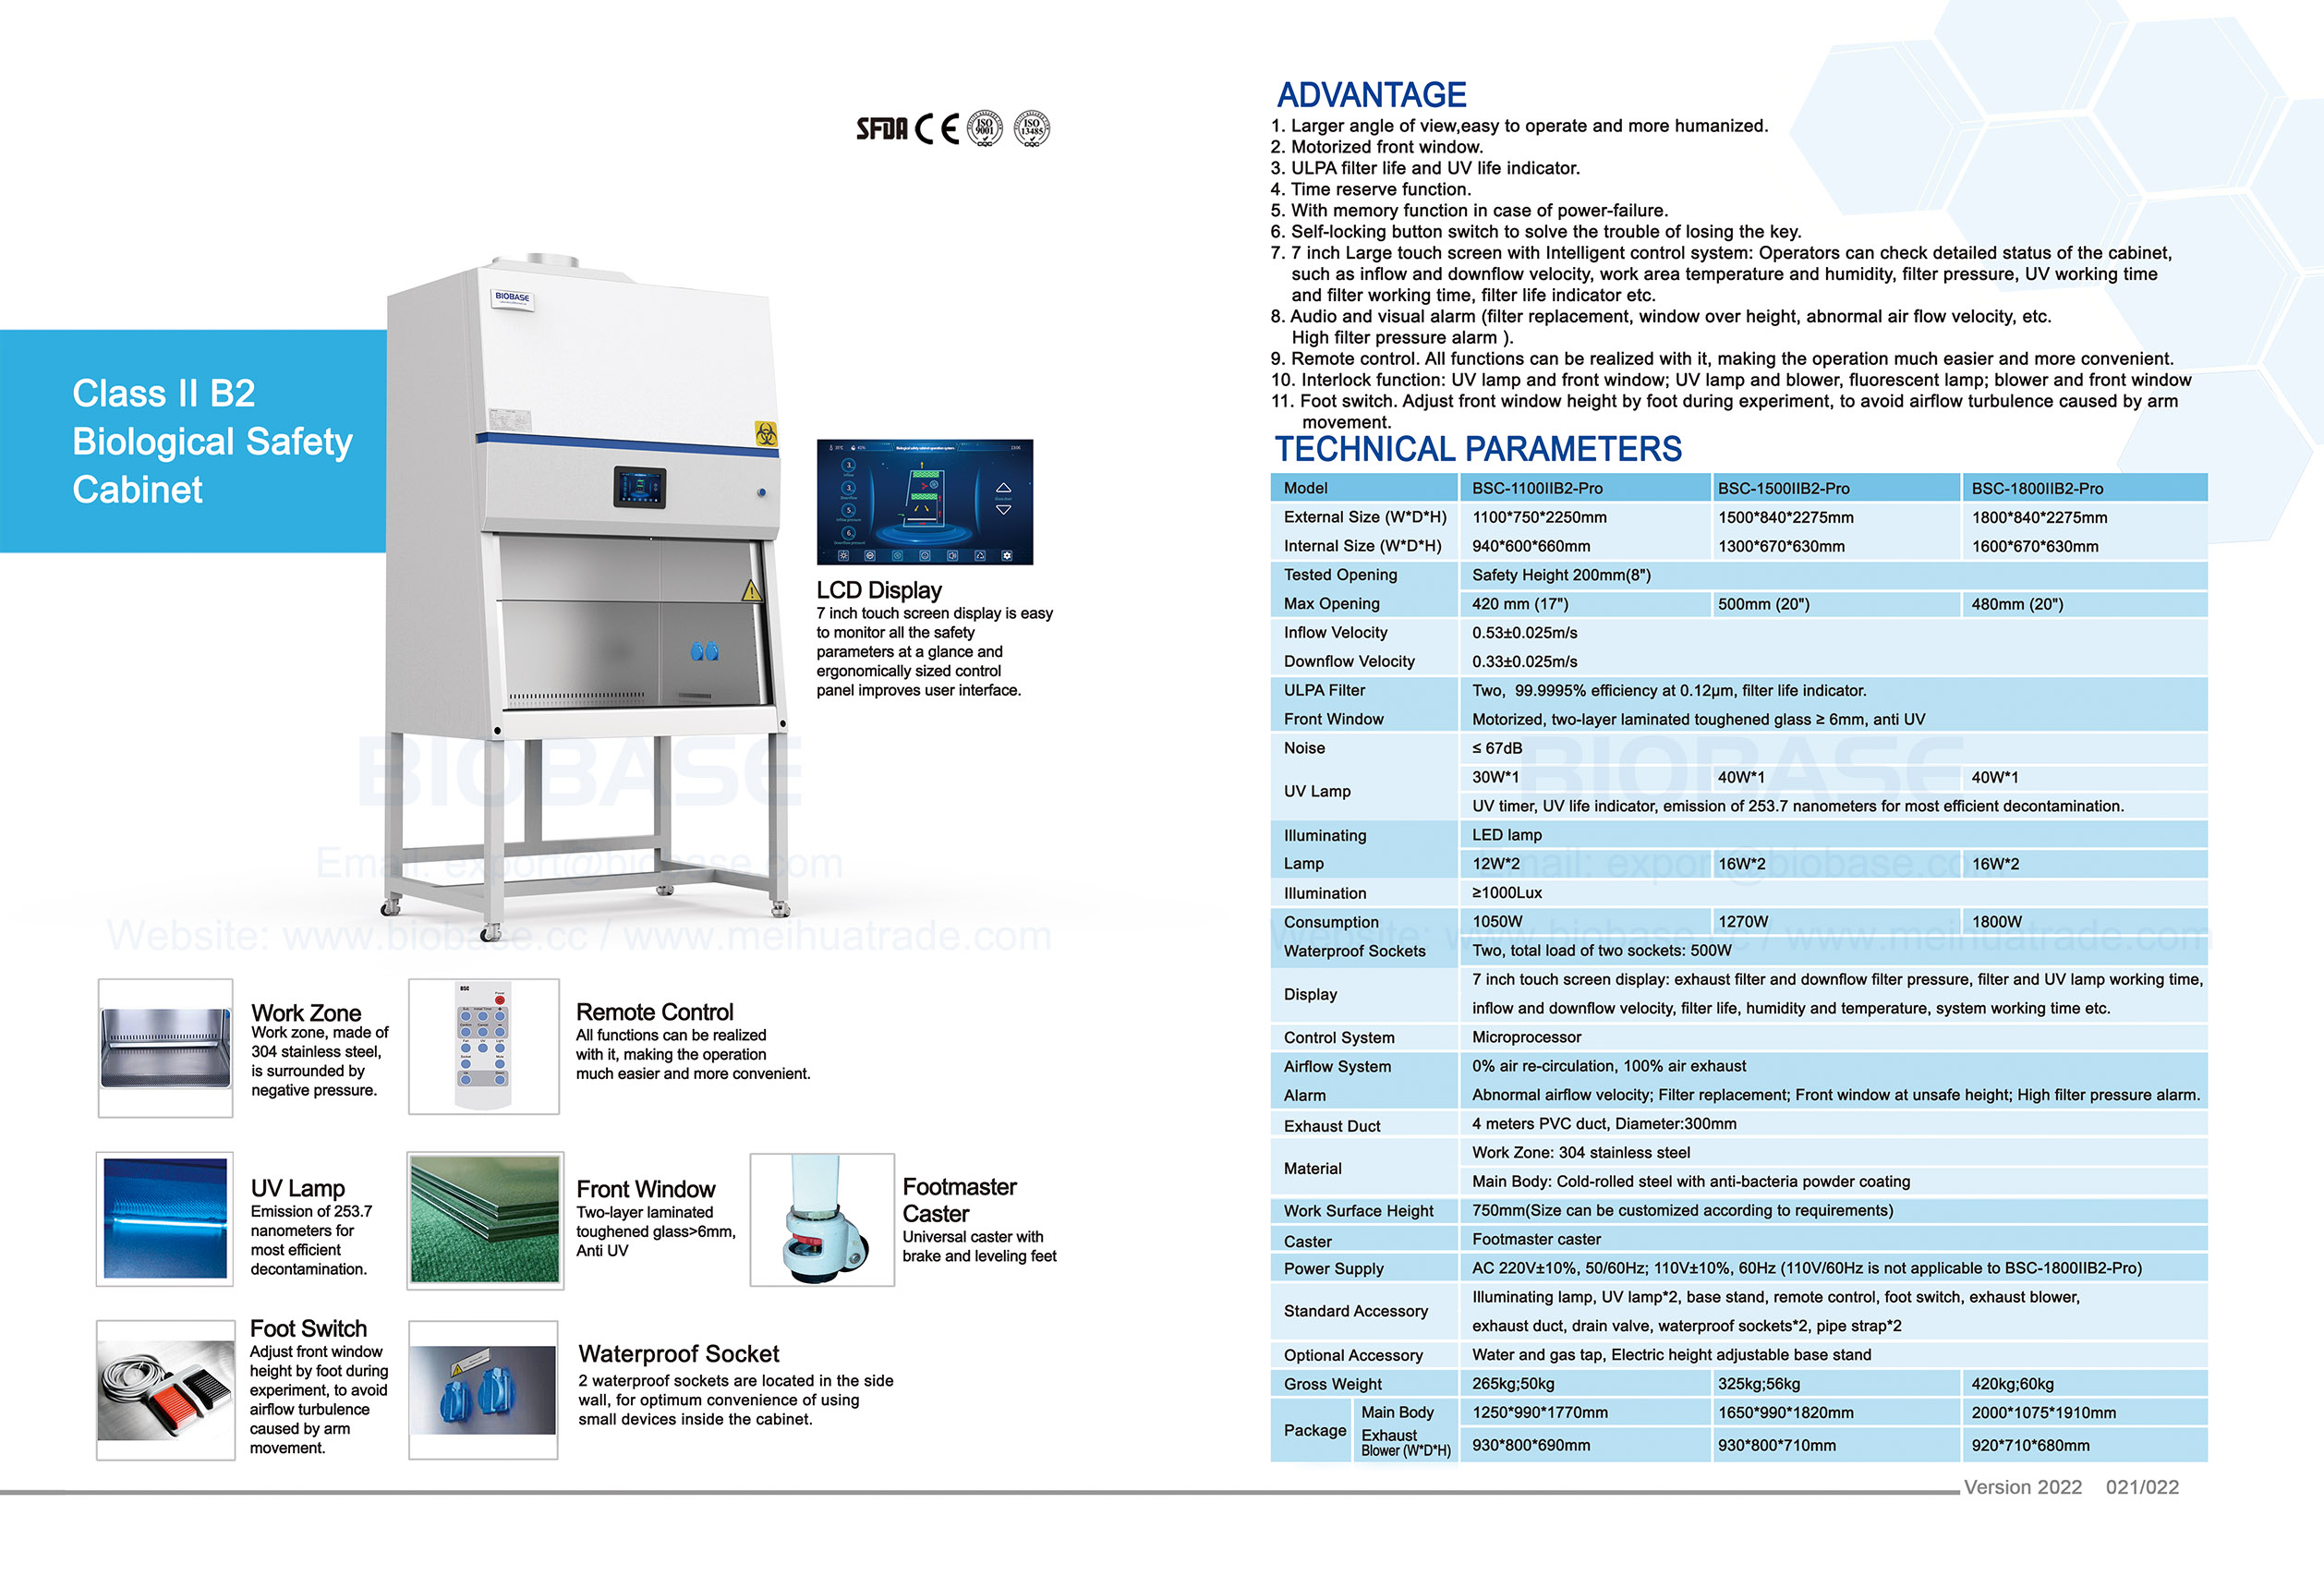 21-22 Class II B2 Biological Safety Cabinet